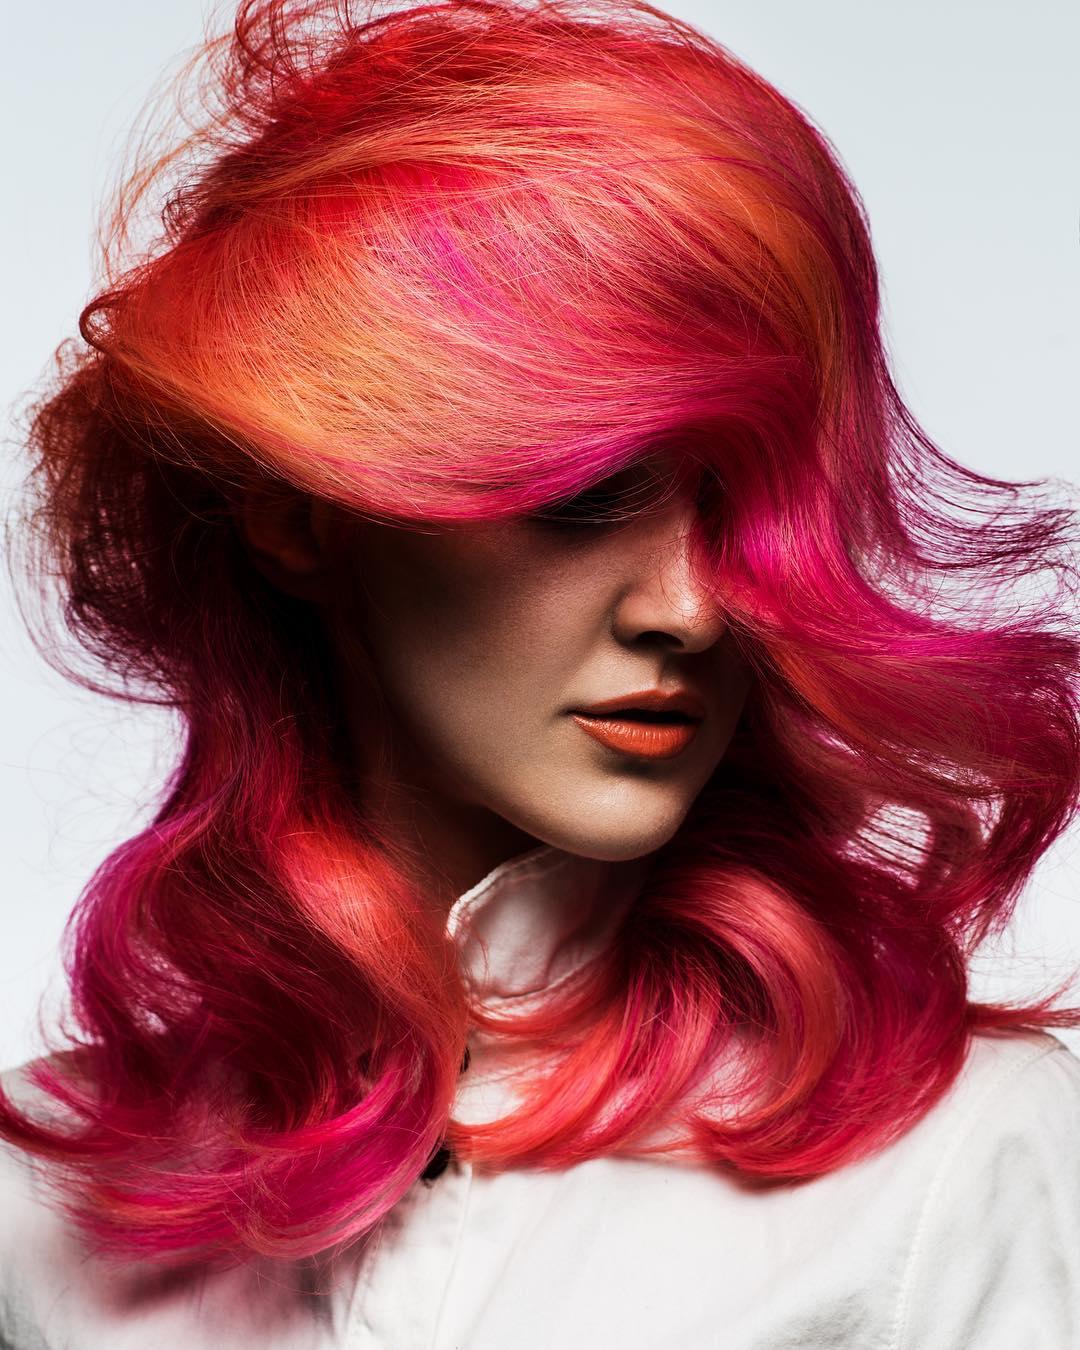 Woman with bright orange red pink hair, styled with loose waves